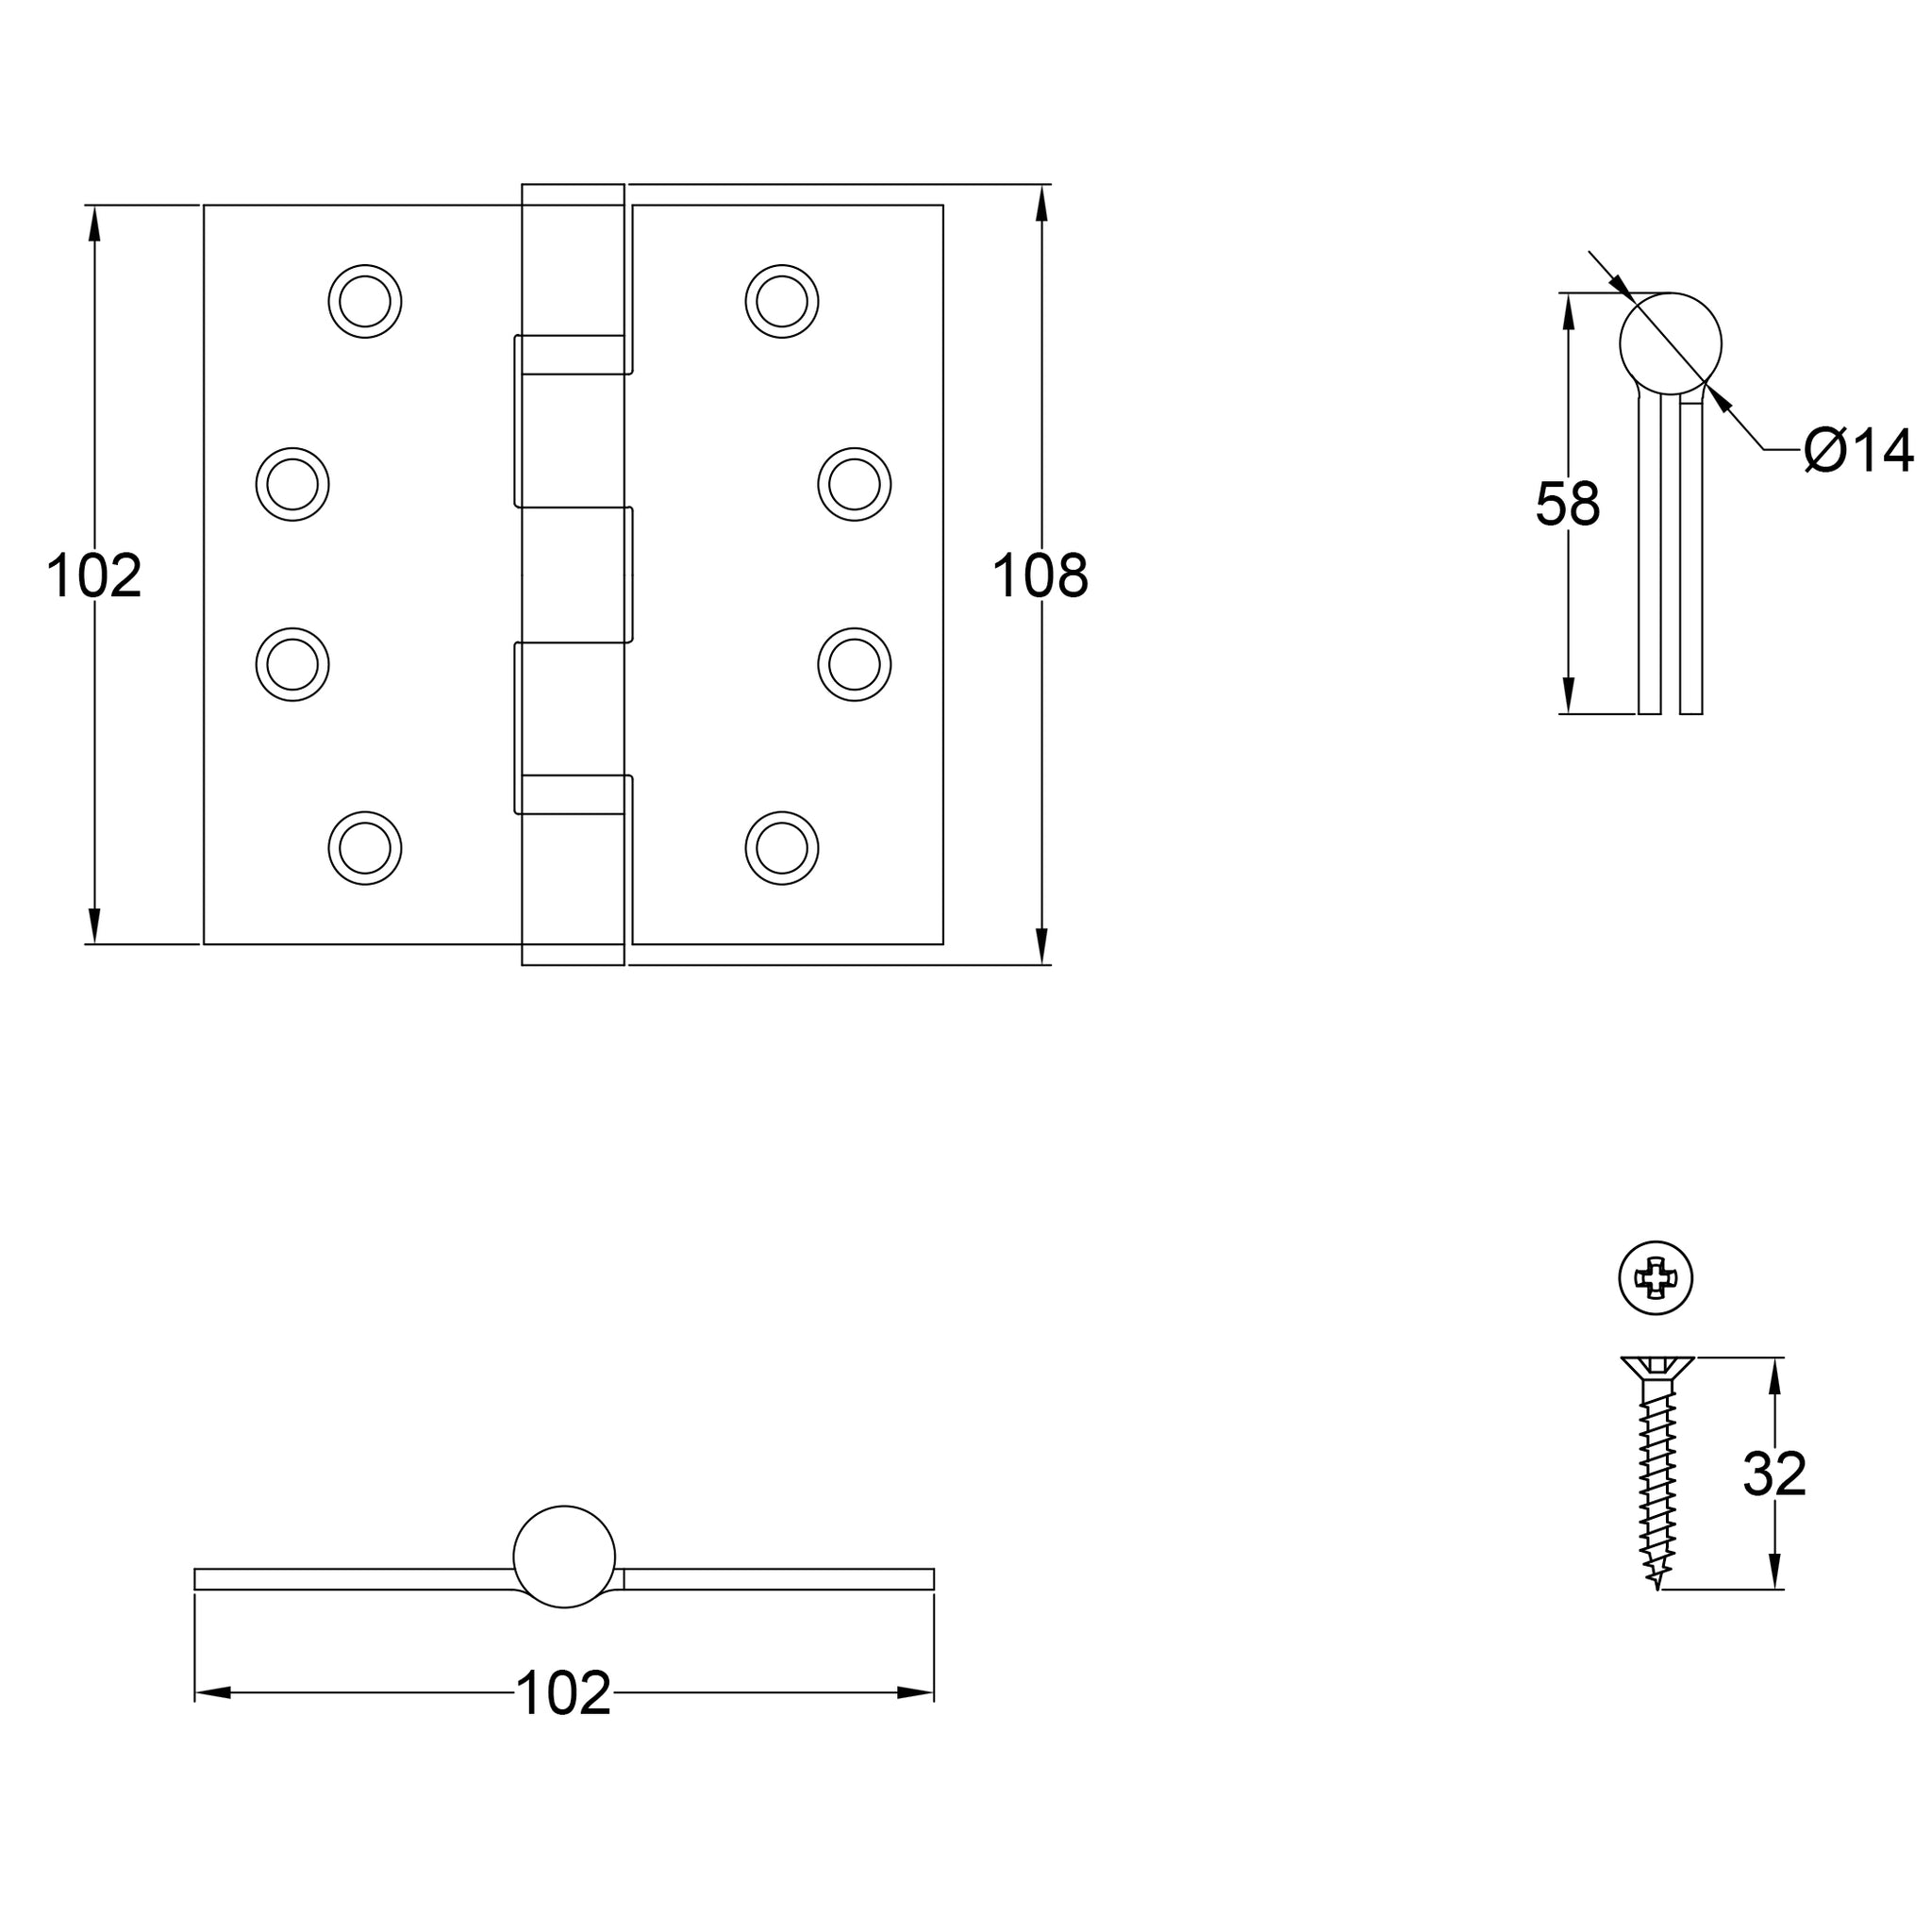 Drawing of Wide ball bearing hinges 4 inch, fire rated door hinges, grade 13 stainless steel SHOW